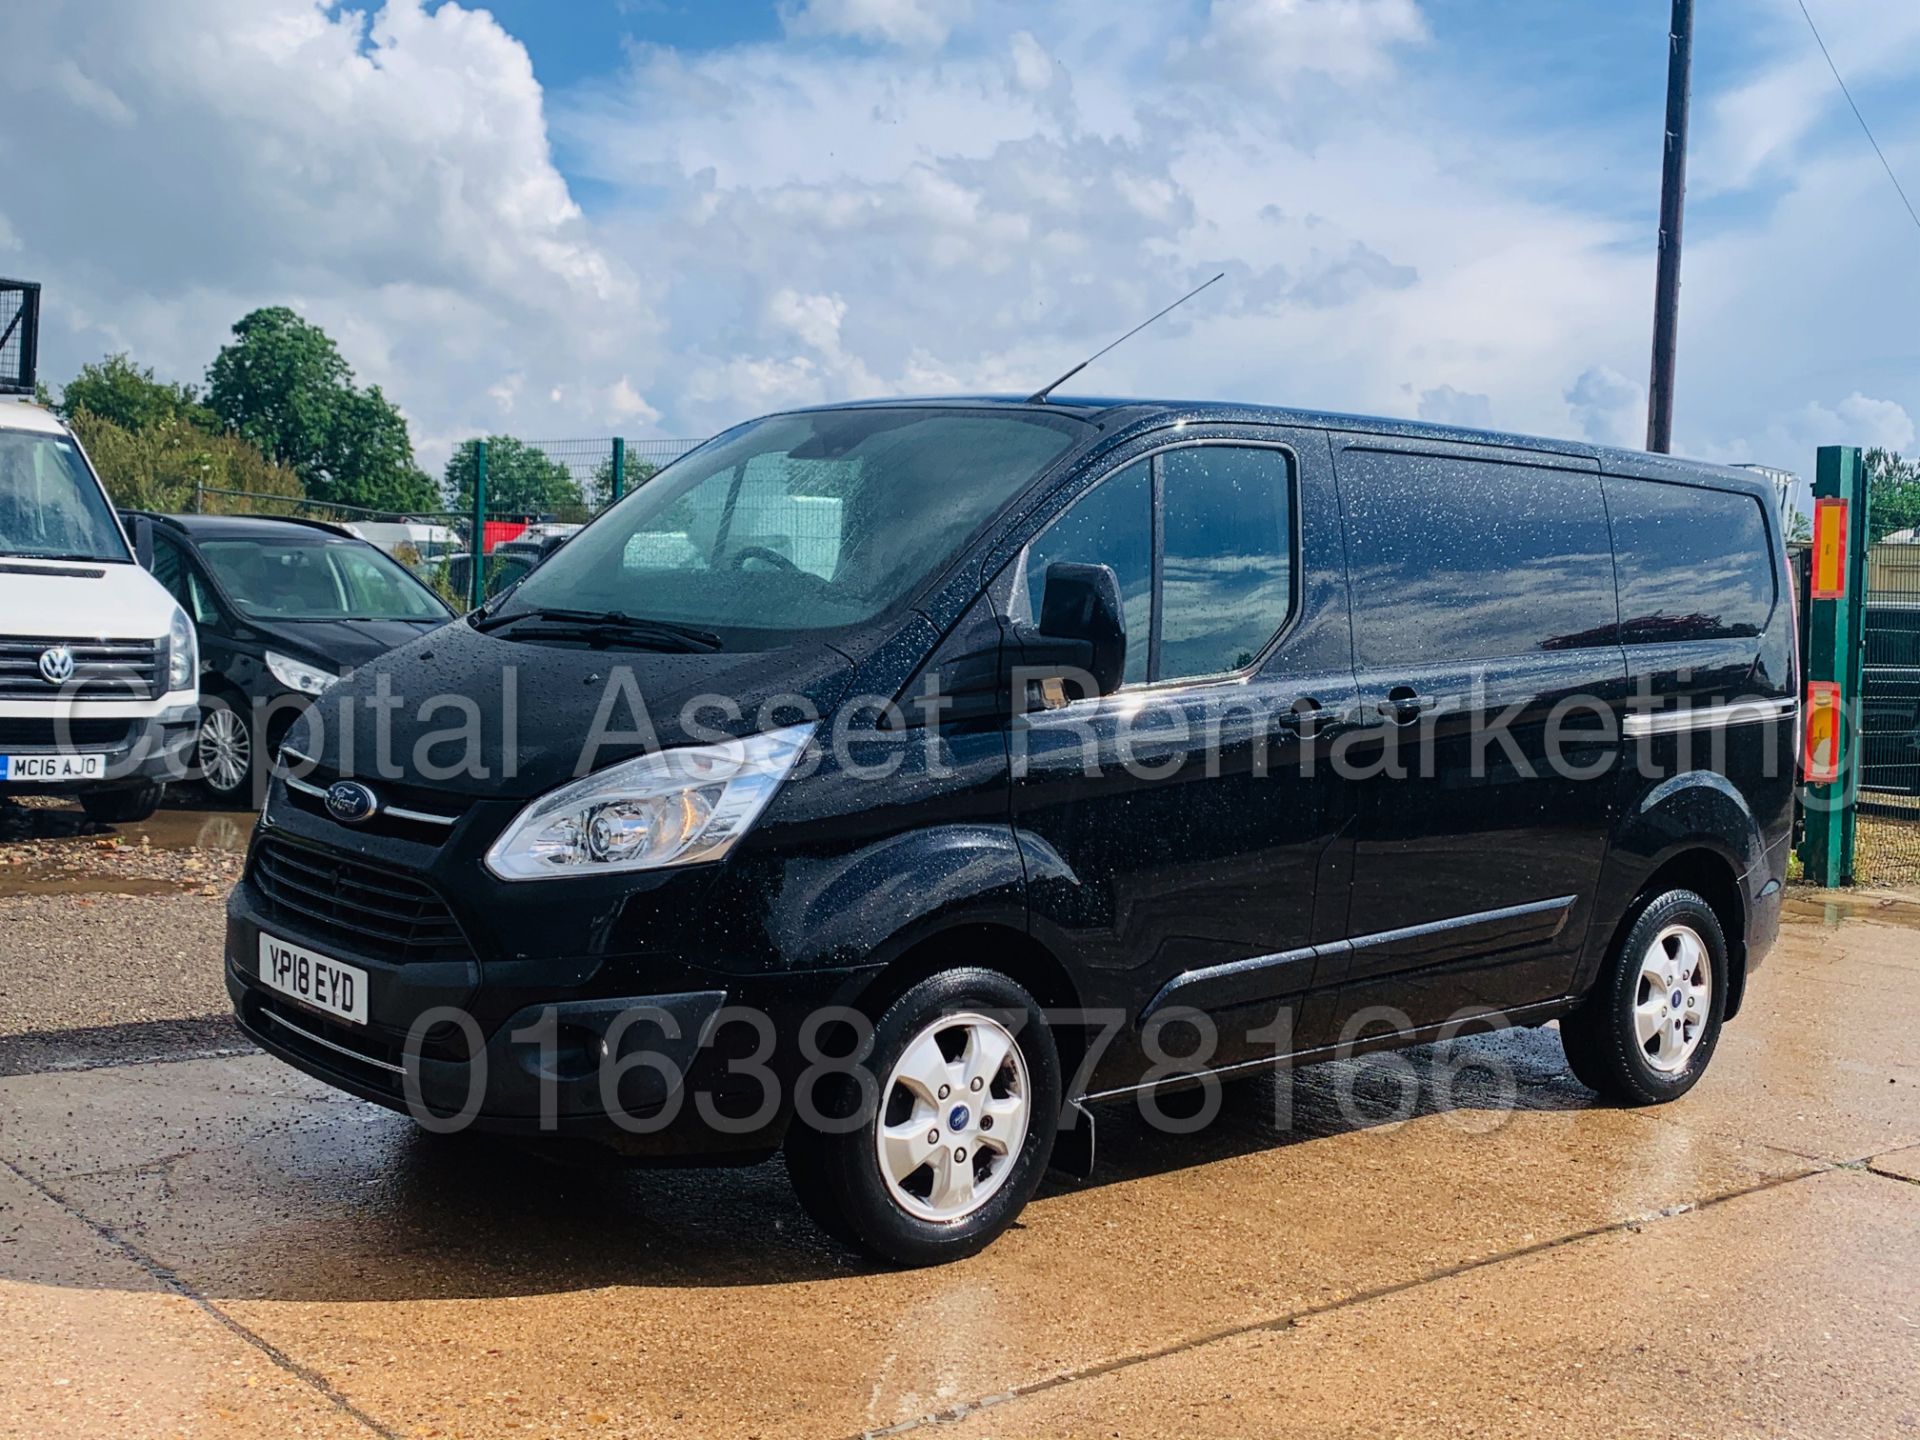 On Sale FORD TRANSIT CUSTOM *LIMITED* (2018 - EURO 6) '2.0 TDCI - 130 BHP - 6 SPEED' **LOW MILES** - Image 6 of 44